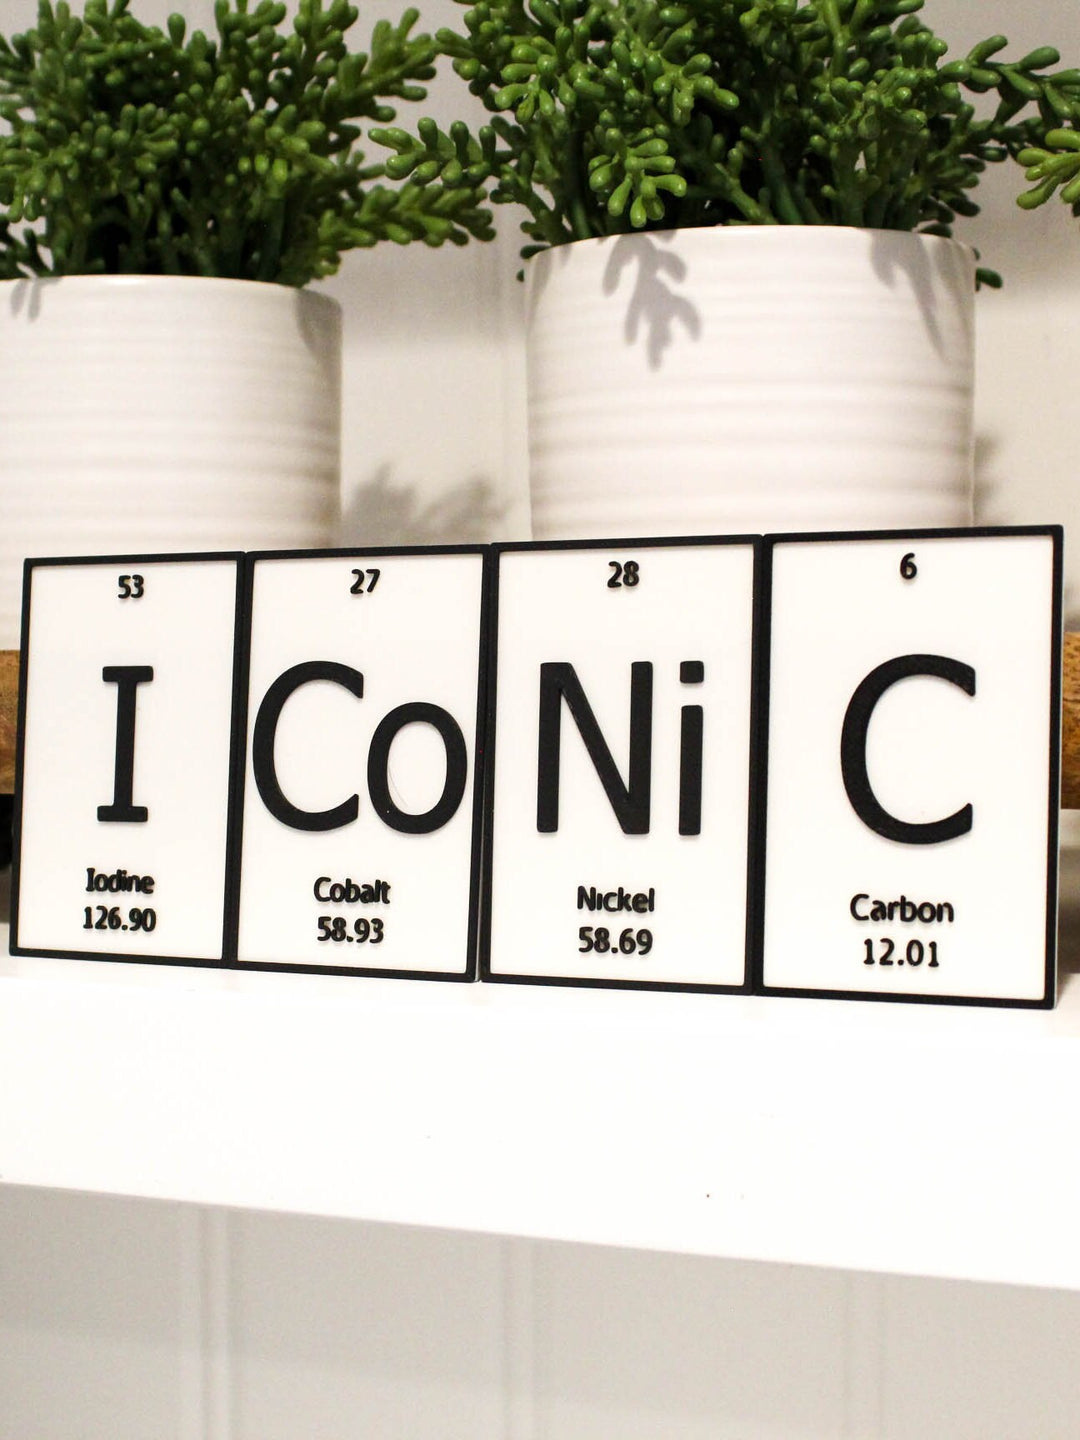 ICoNiC | Periodic Table of Elements Wall, Desk or Shelf Sign